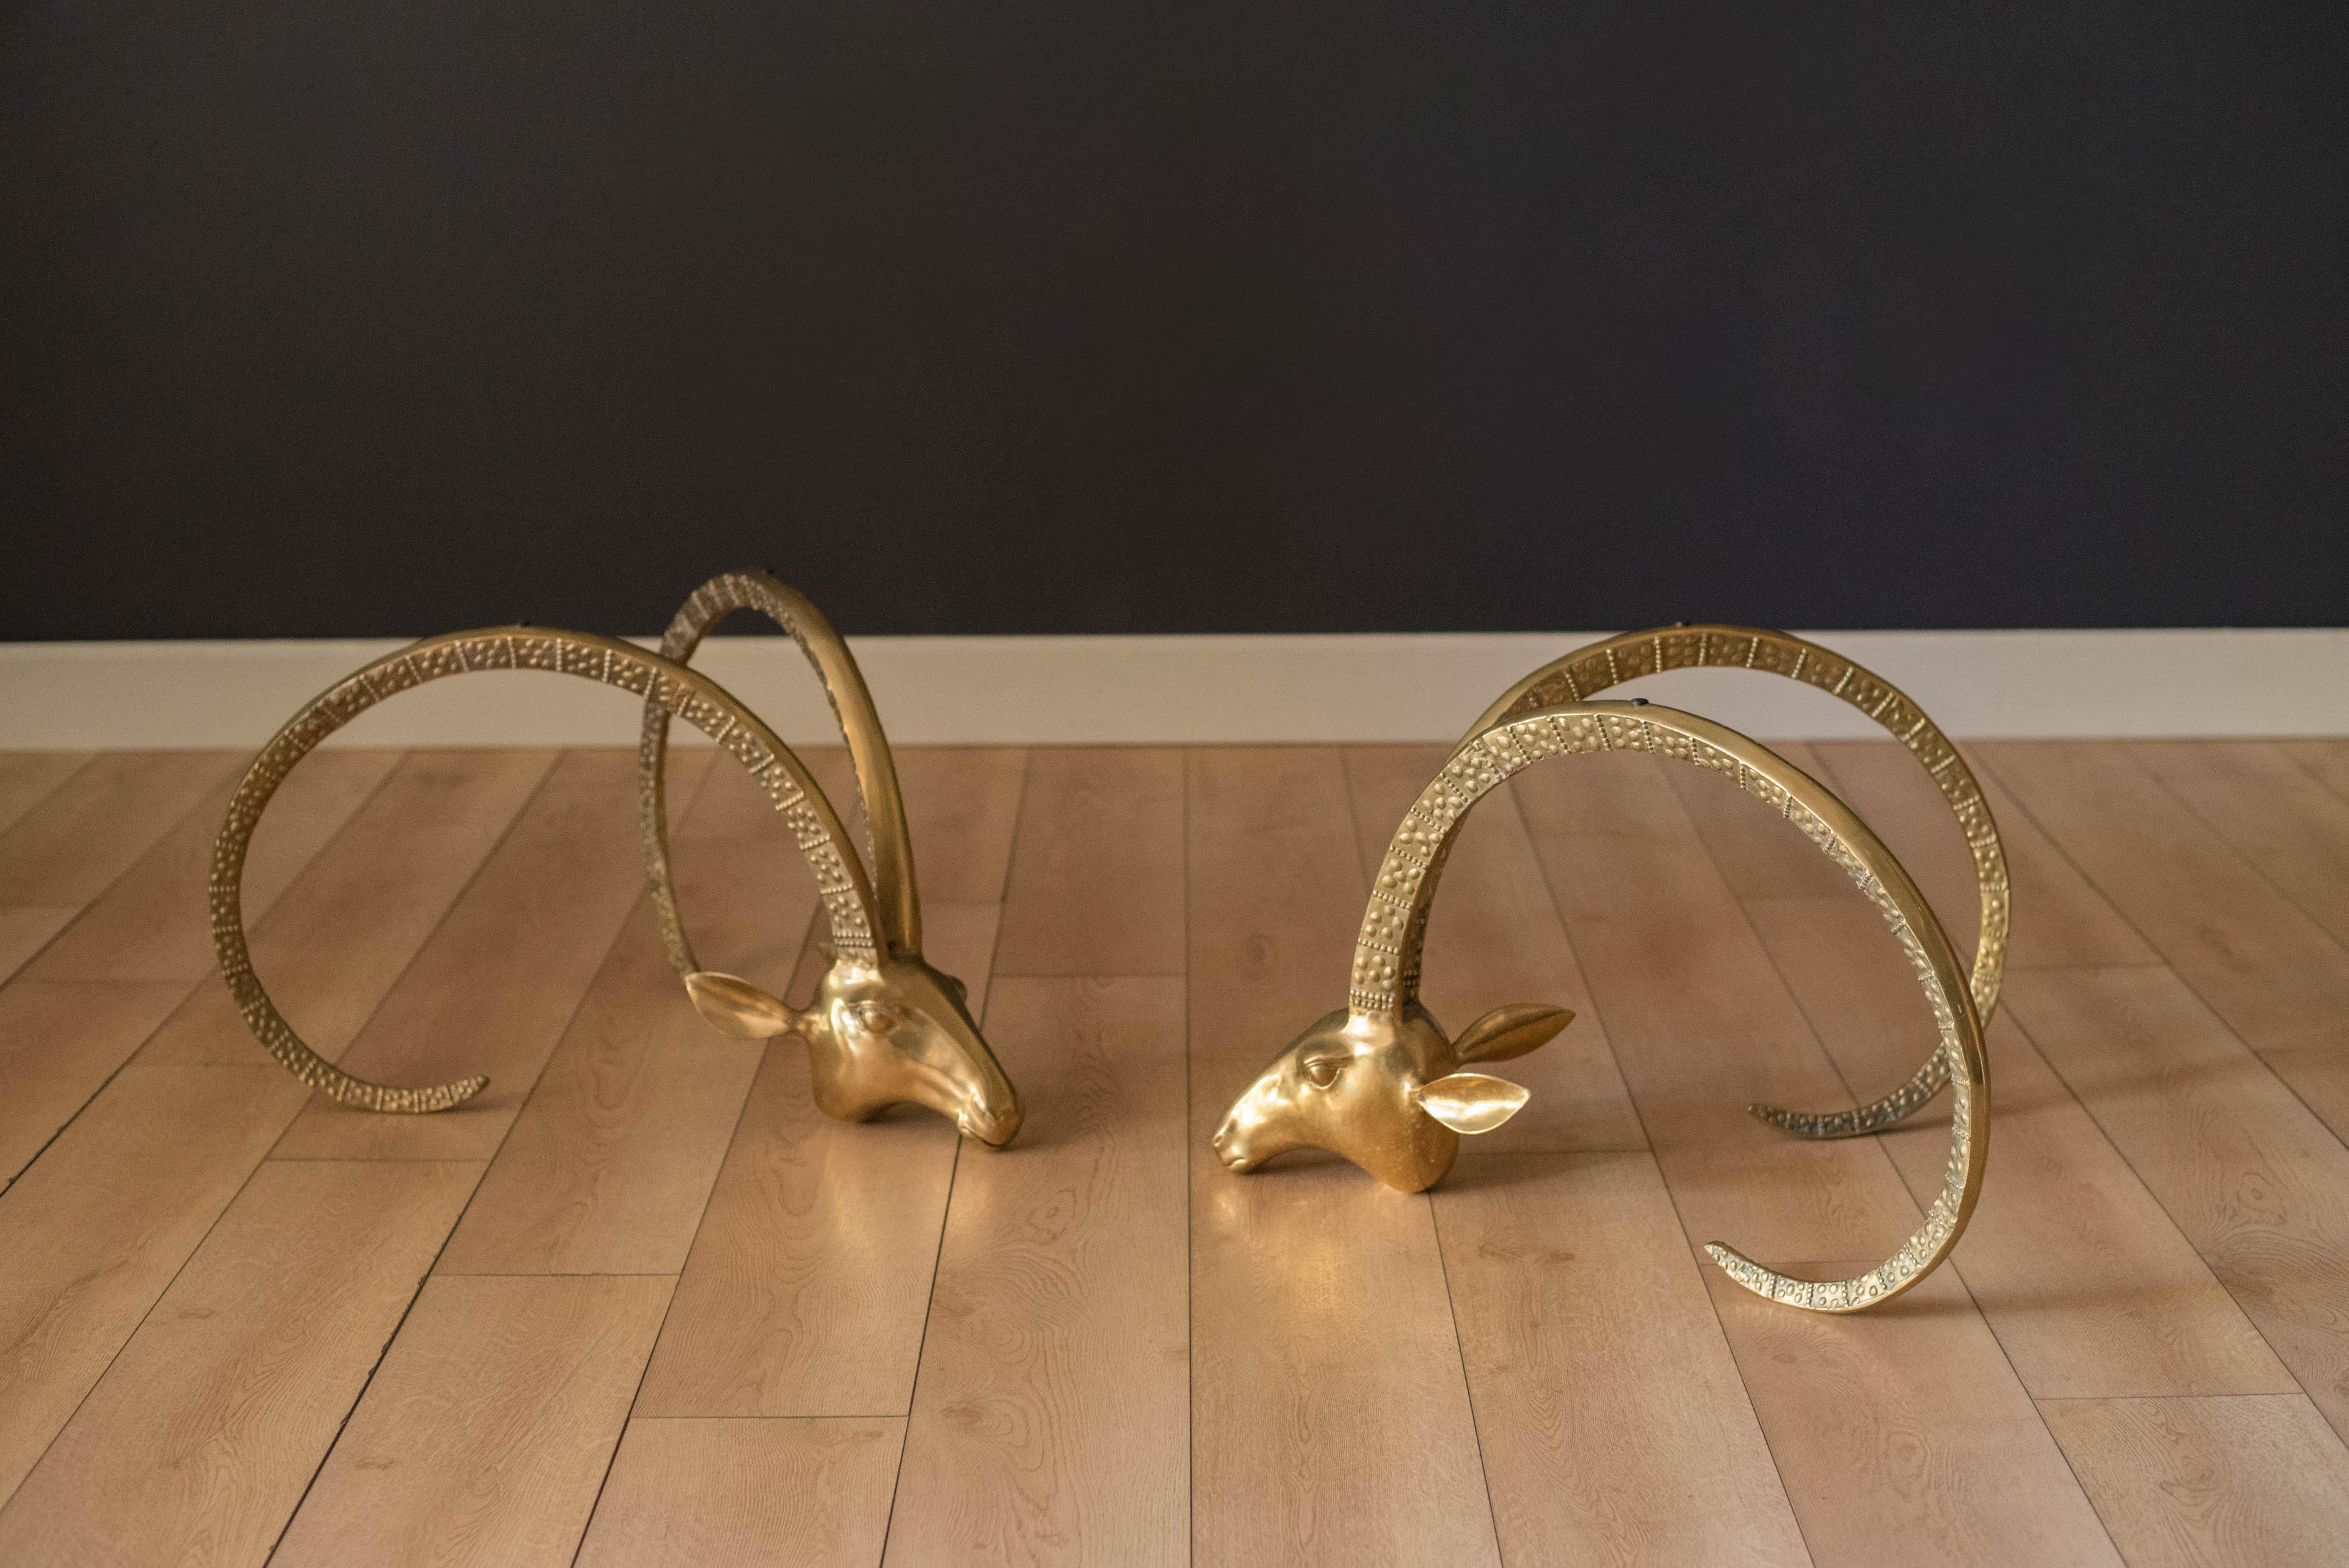 Vintage Ibex Rams head brass sculptures in the manner of Alain Chervet, circa 1970s. This sophisticated and dramatic focal point will be a statement piece in any interior living space. Versatile enough to form a coffee table or separately as a pair